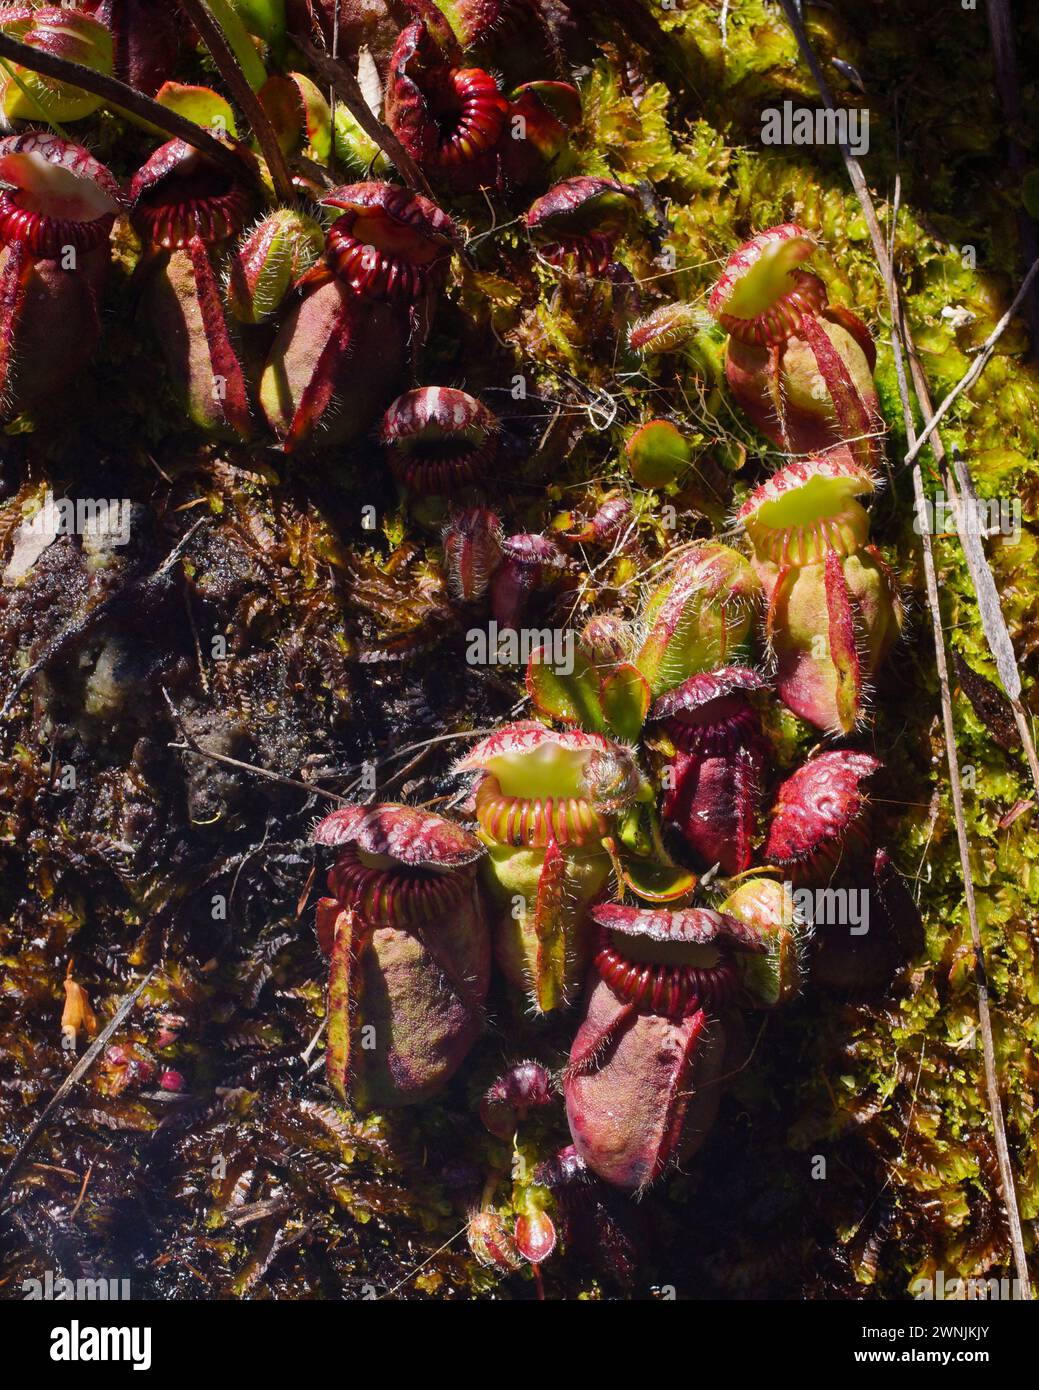 Albany pitcher plant (Cephalotus follicularis), multiple pitchers in the sun, in natural habitat, Western Australia Stock Photo